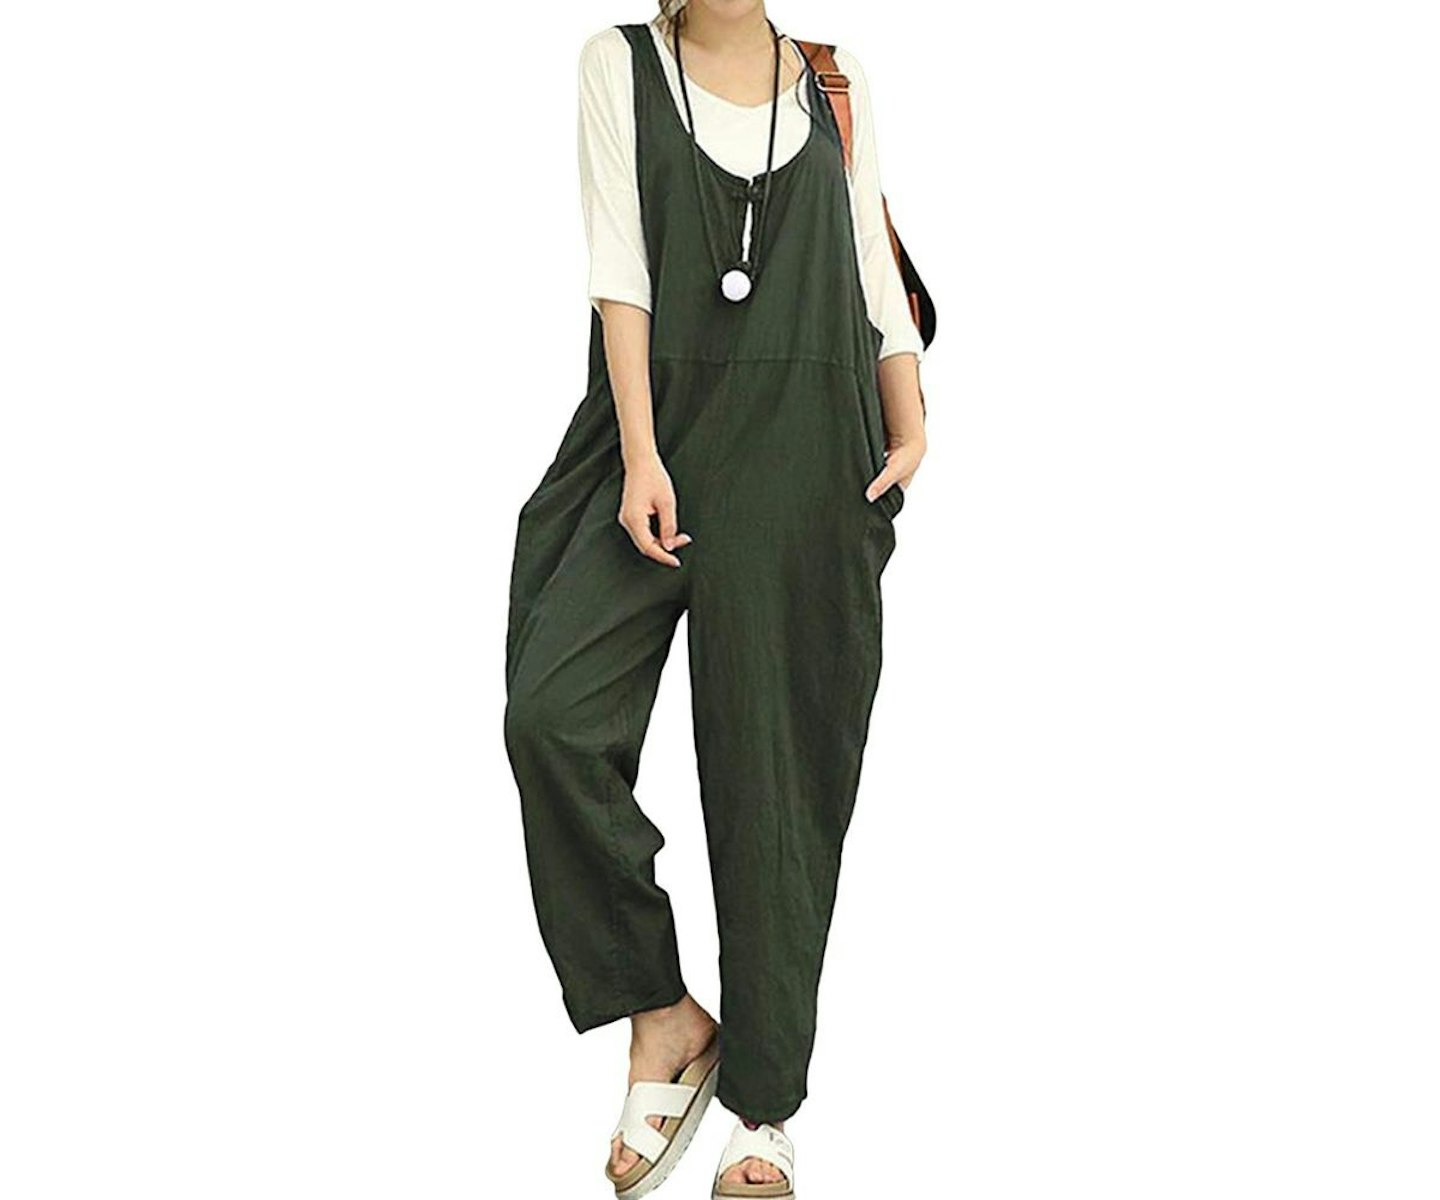 Kidsform Women's Loose Overall Dungarees